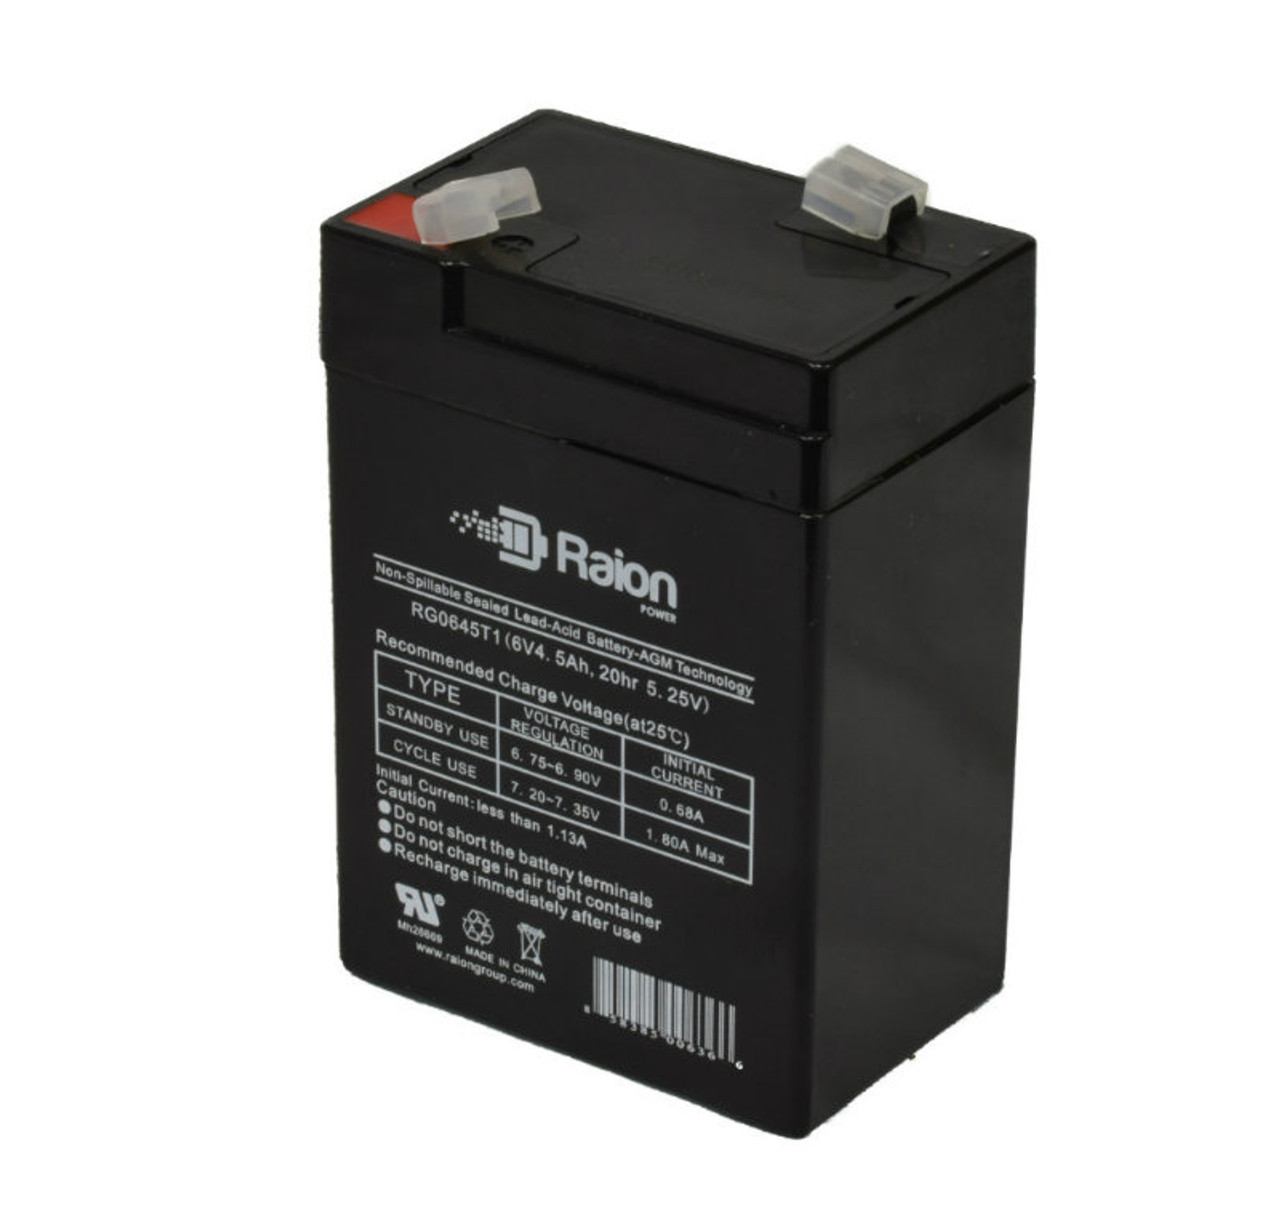 Raion Power RG0645T1 6V 4.5Ah Replacement Battery Cartridge for Baxter Healthcare Cardiac Output Computer 522